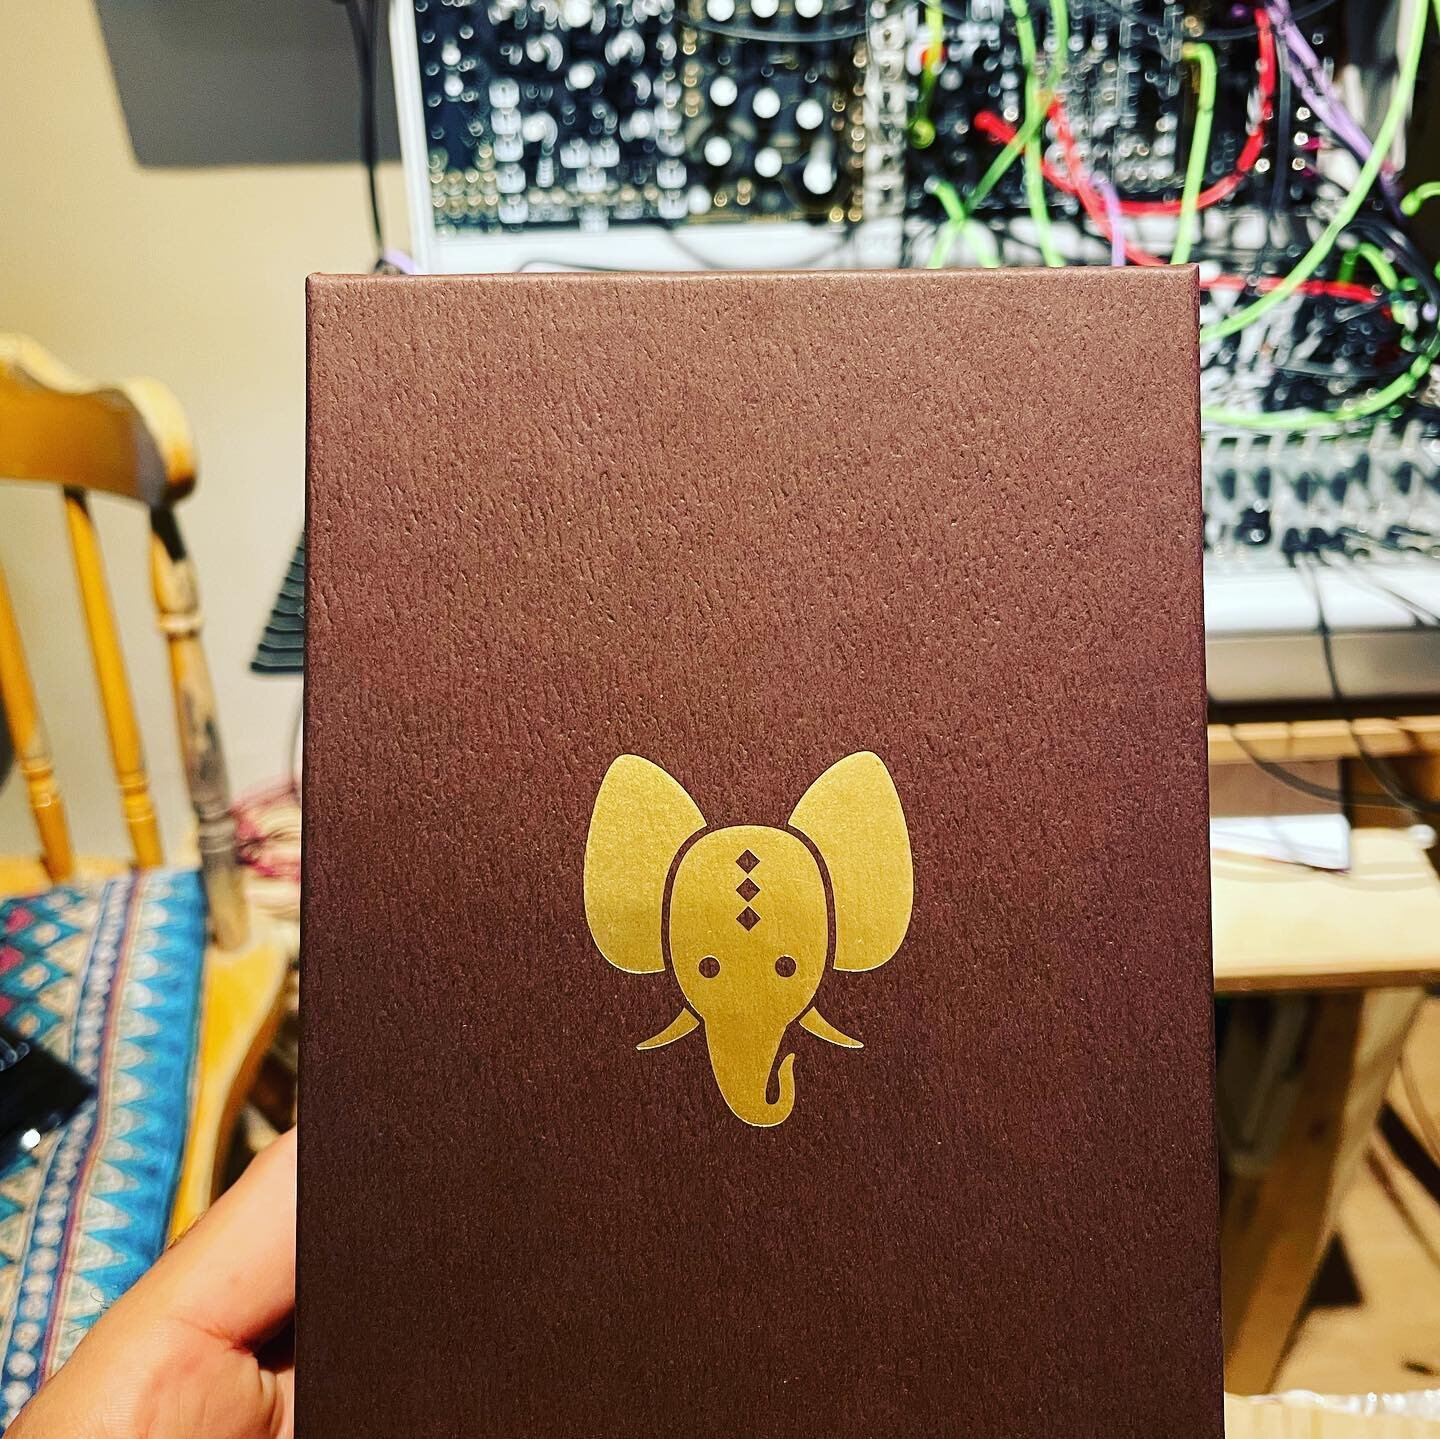 I have been waiting for it! Years of fantasy, let&rsquo;s hear what you can do :) #lpg #lowpassgate #rabidelephantnaturalgate #naturalgate #modular #eurorack #signalsounds